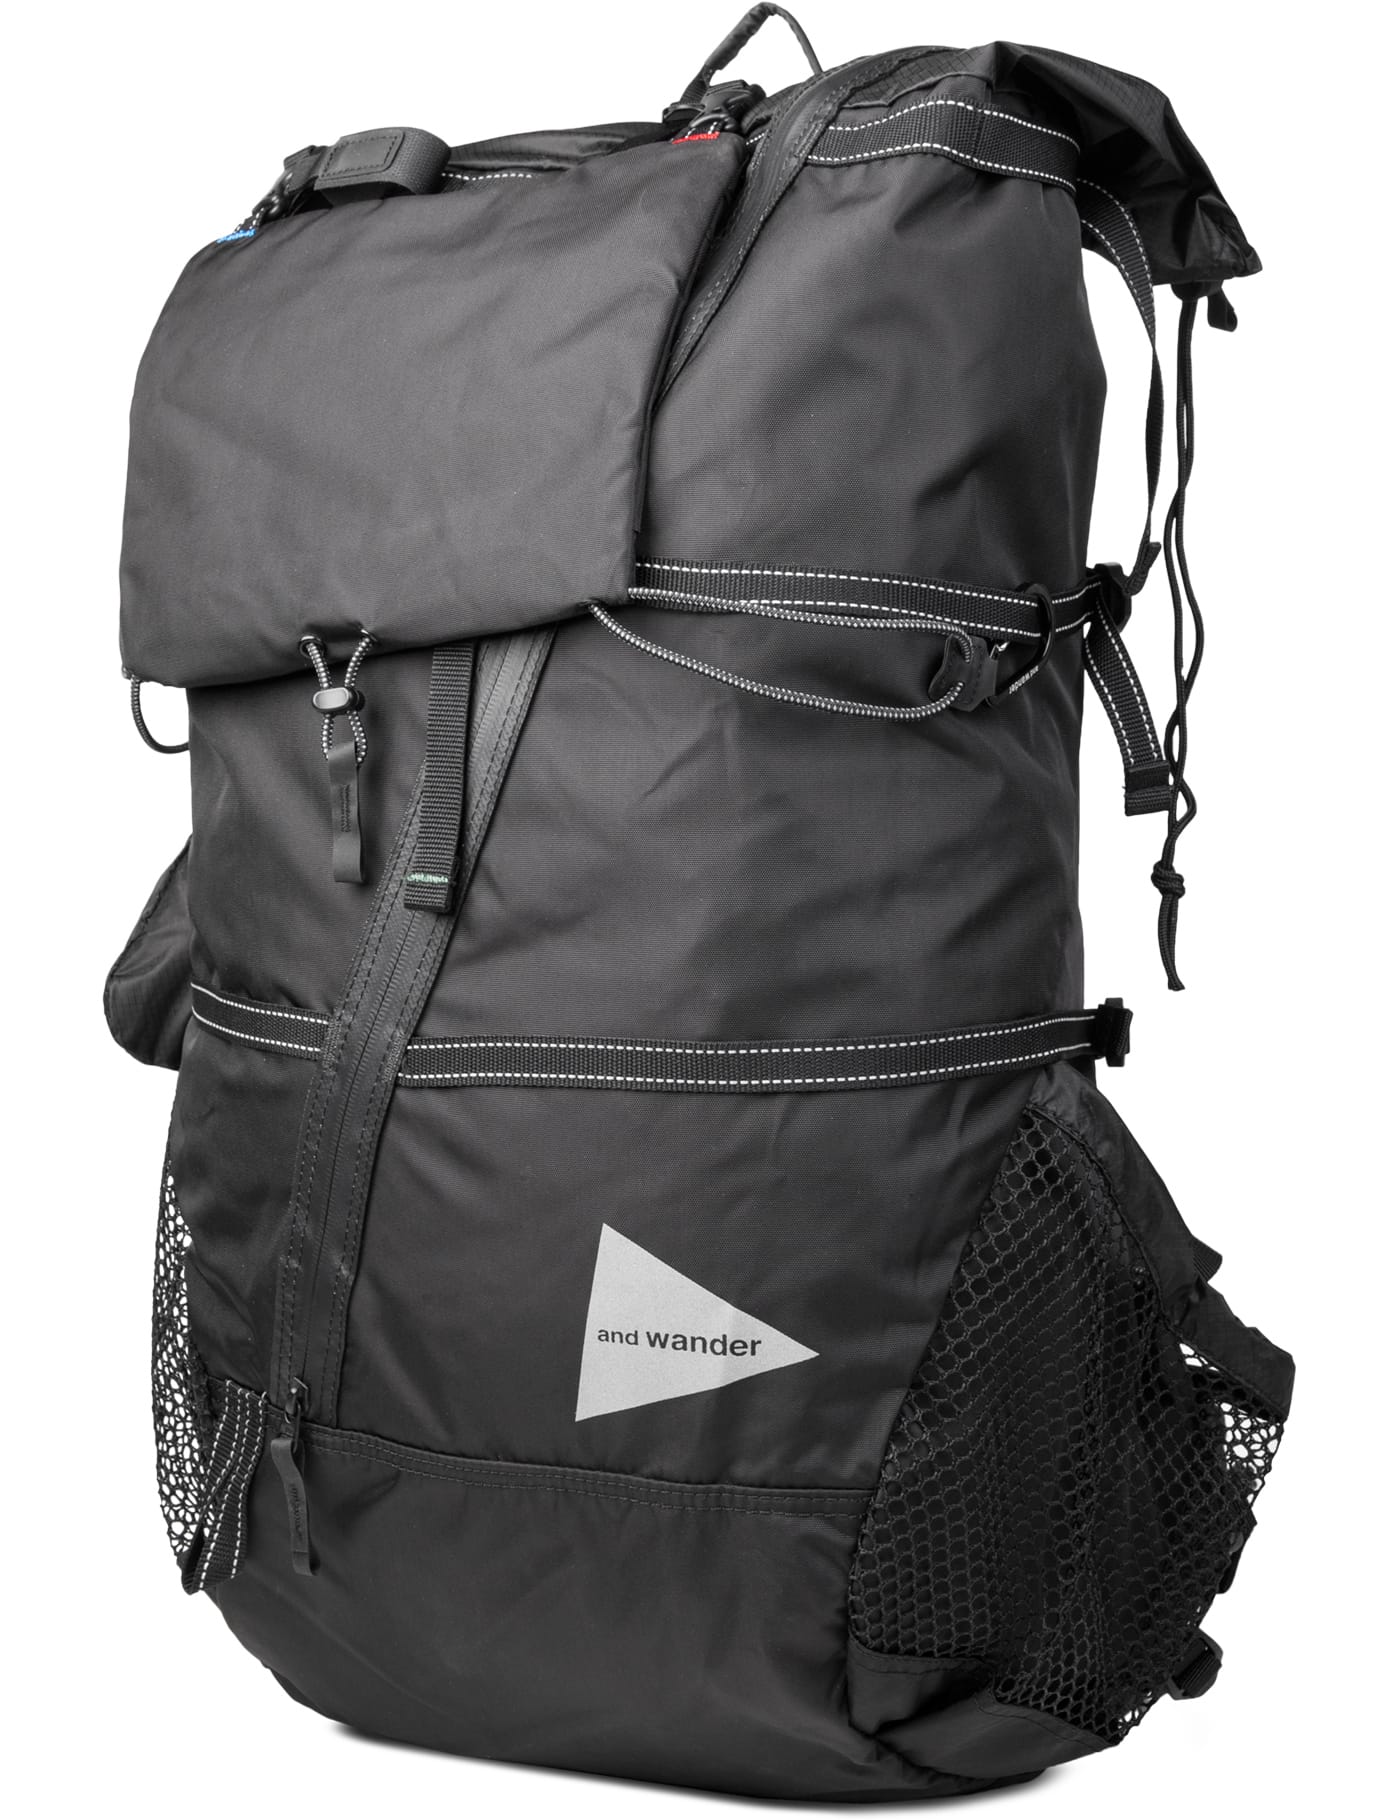 and wander - AW-AA911 40L Backpack | HBX - Globally Curated